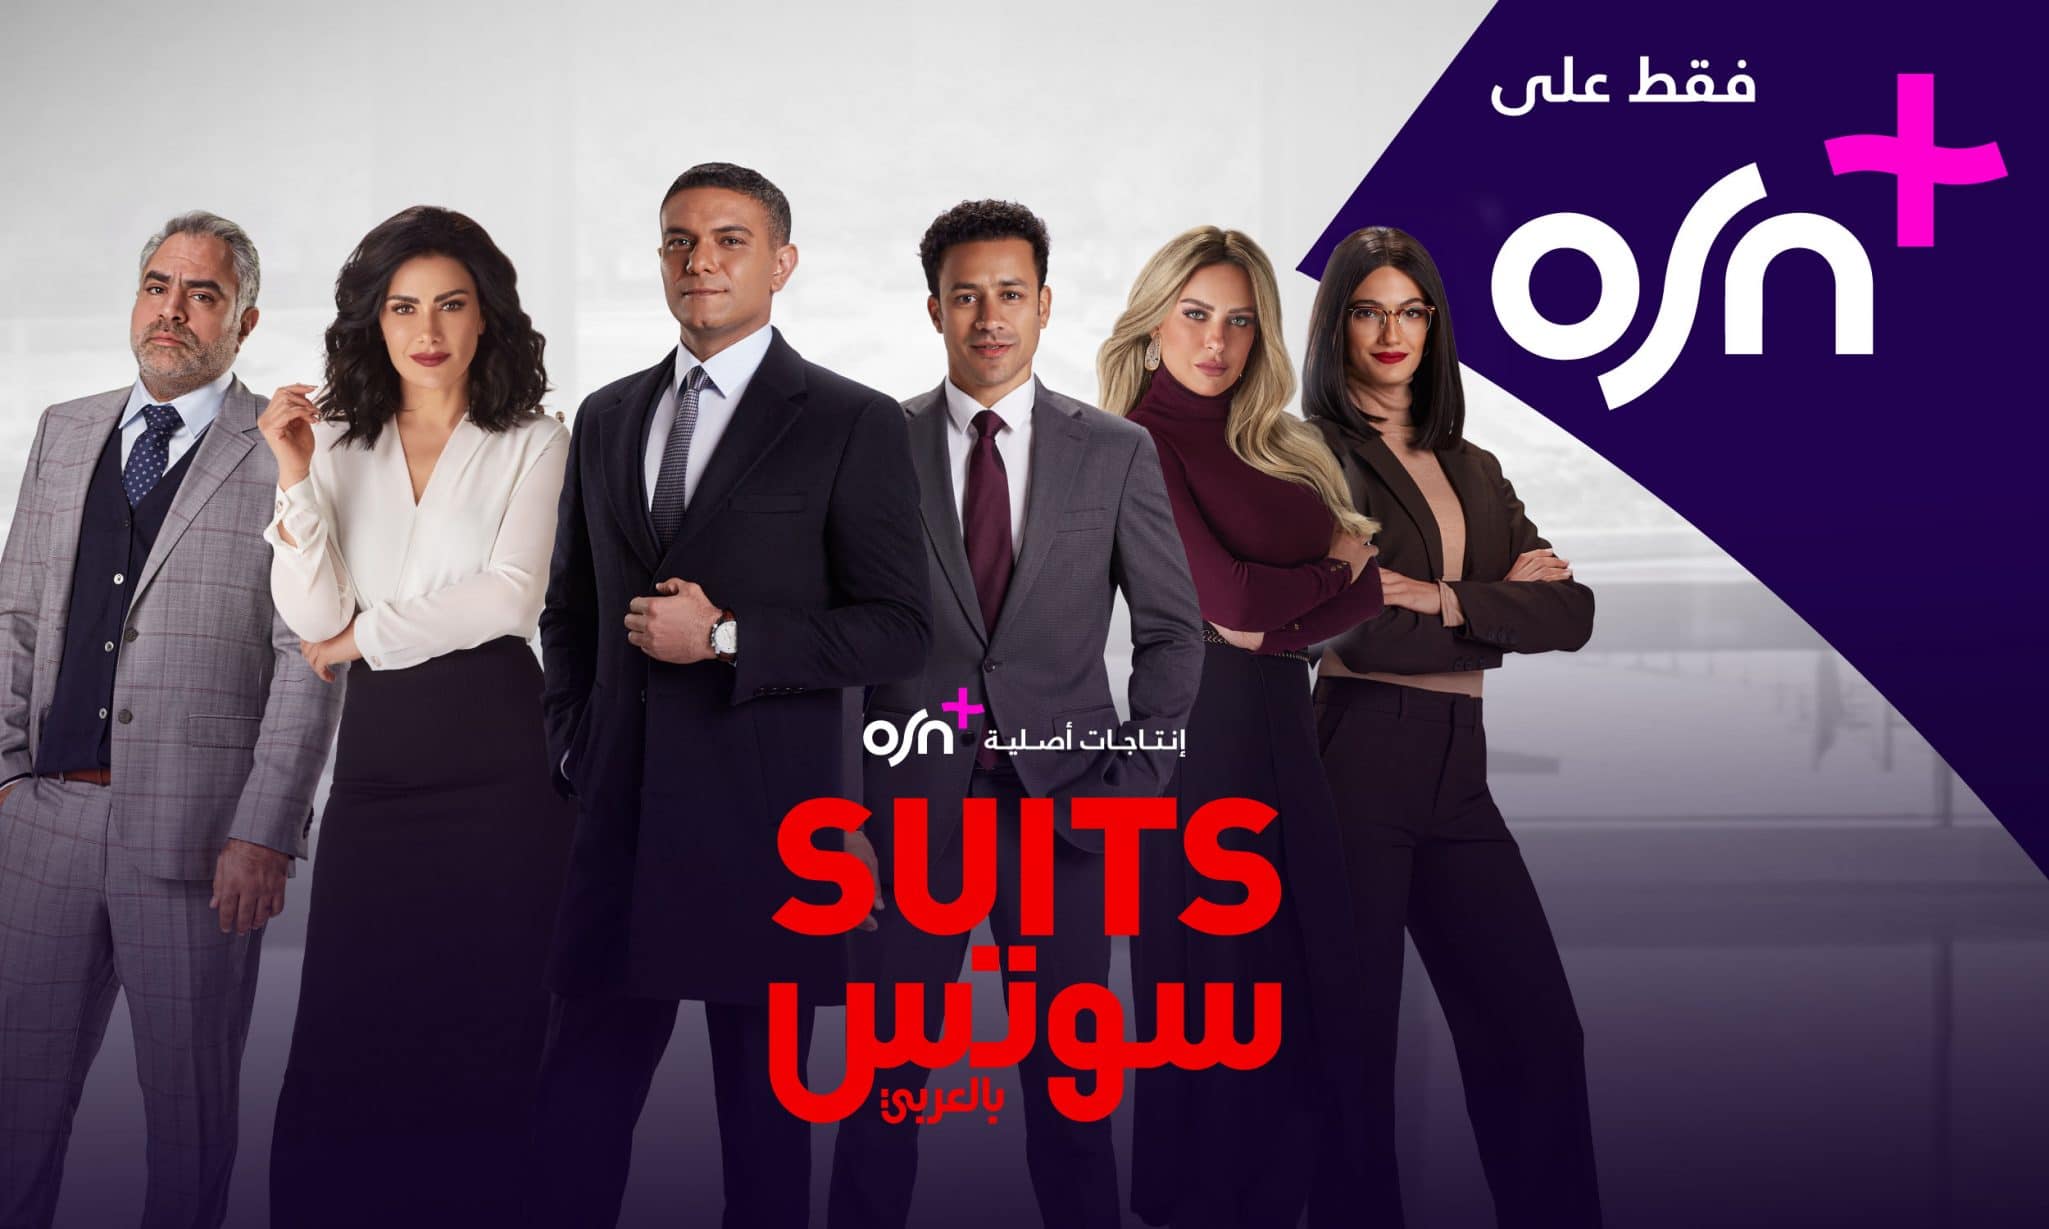 Suits Arabia OSN scaled